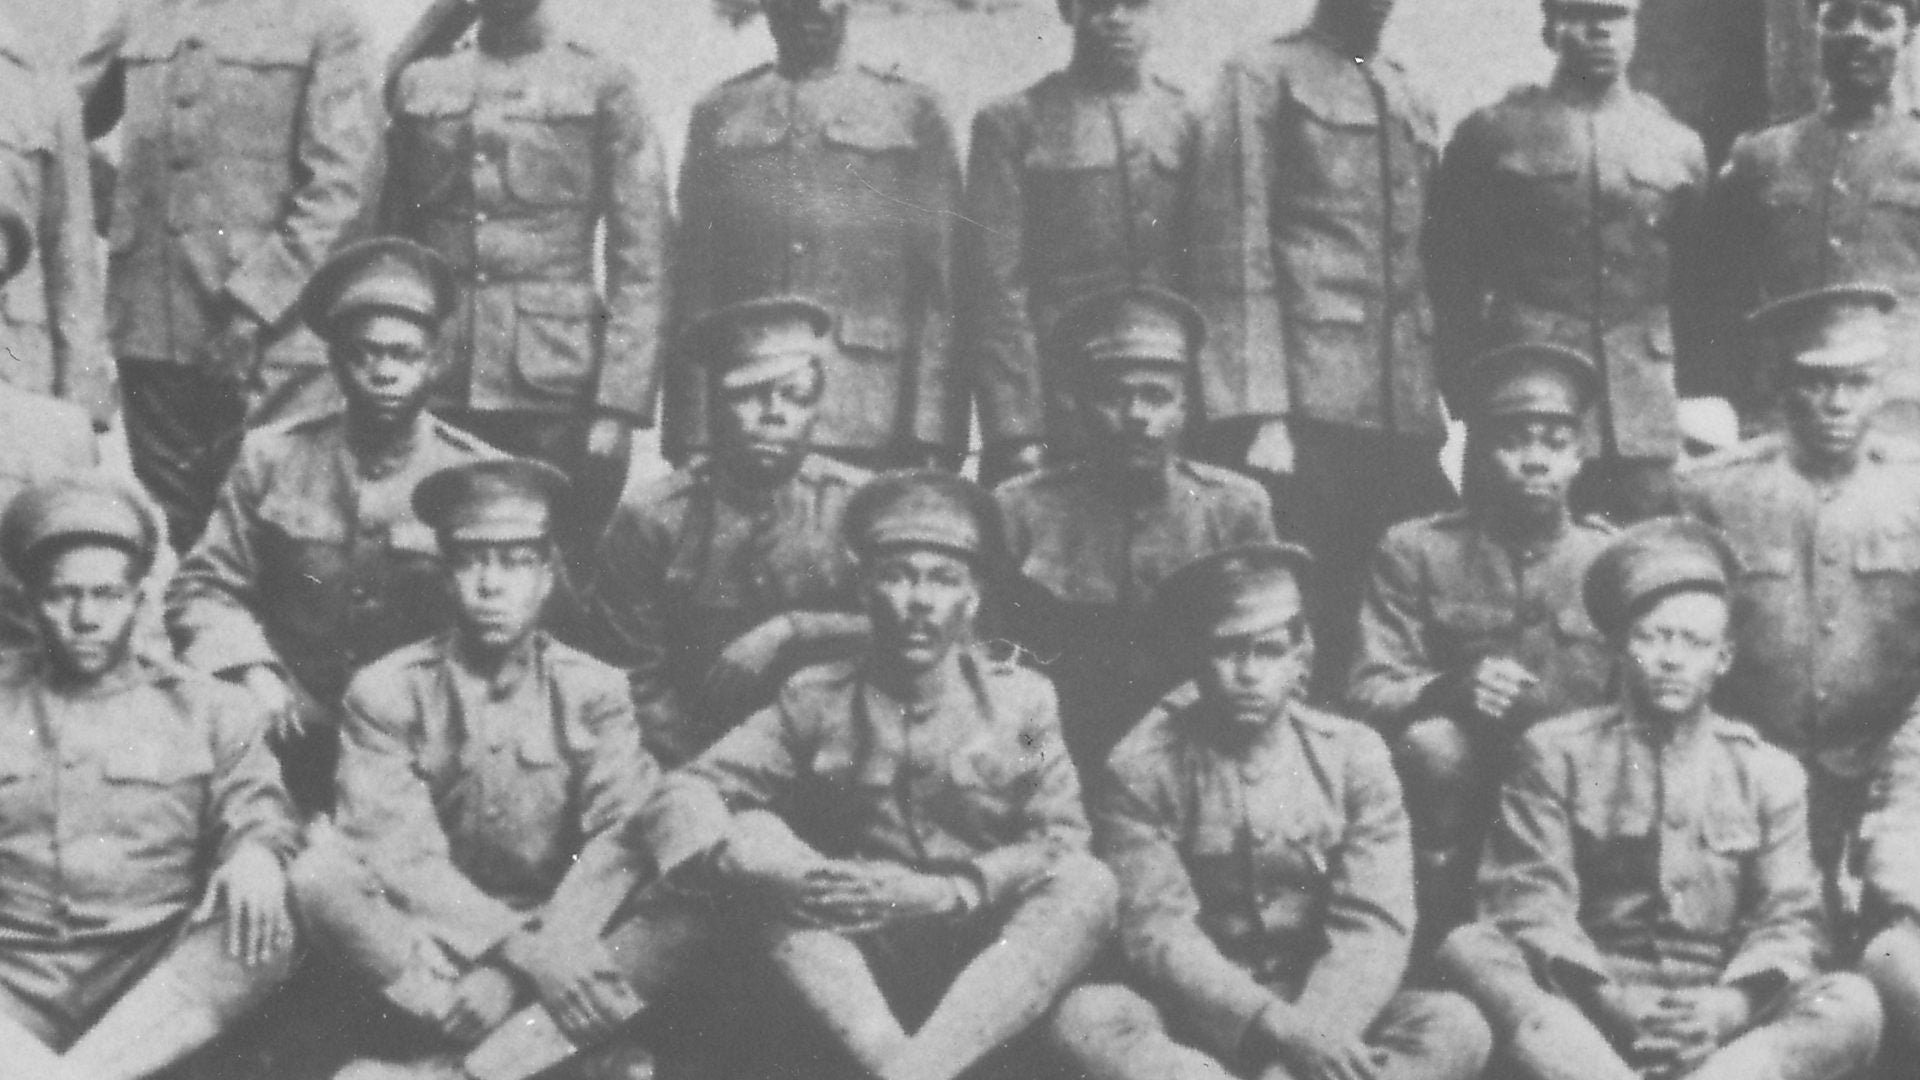 U.S. Army Conducted Largest Execution Of Its Own Black Soldiers. Their Gravesites Are Finally Getting Proper Headstones Over A Century Later